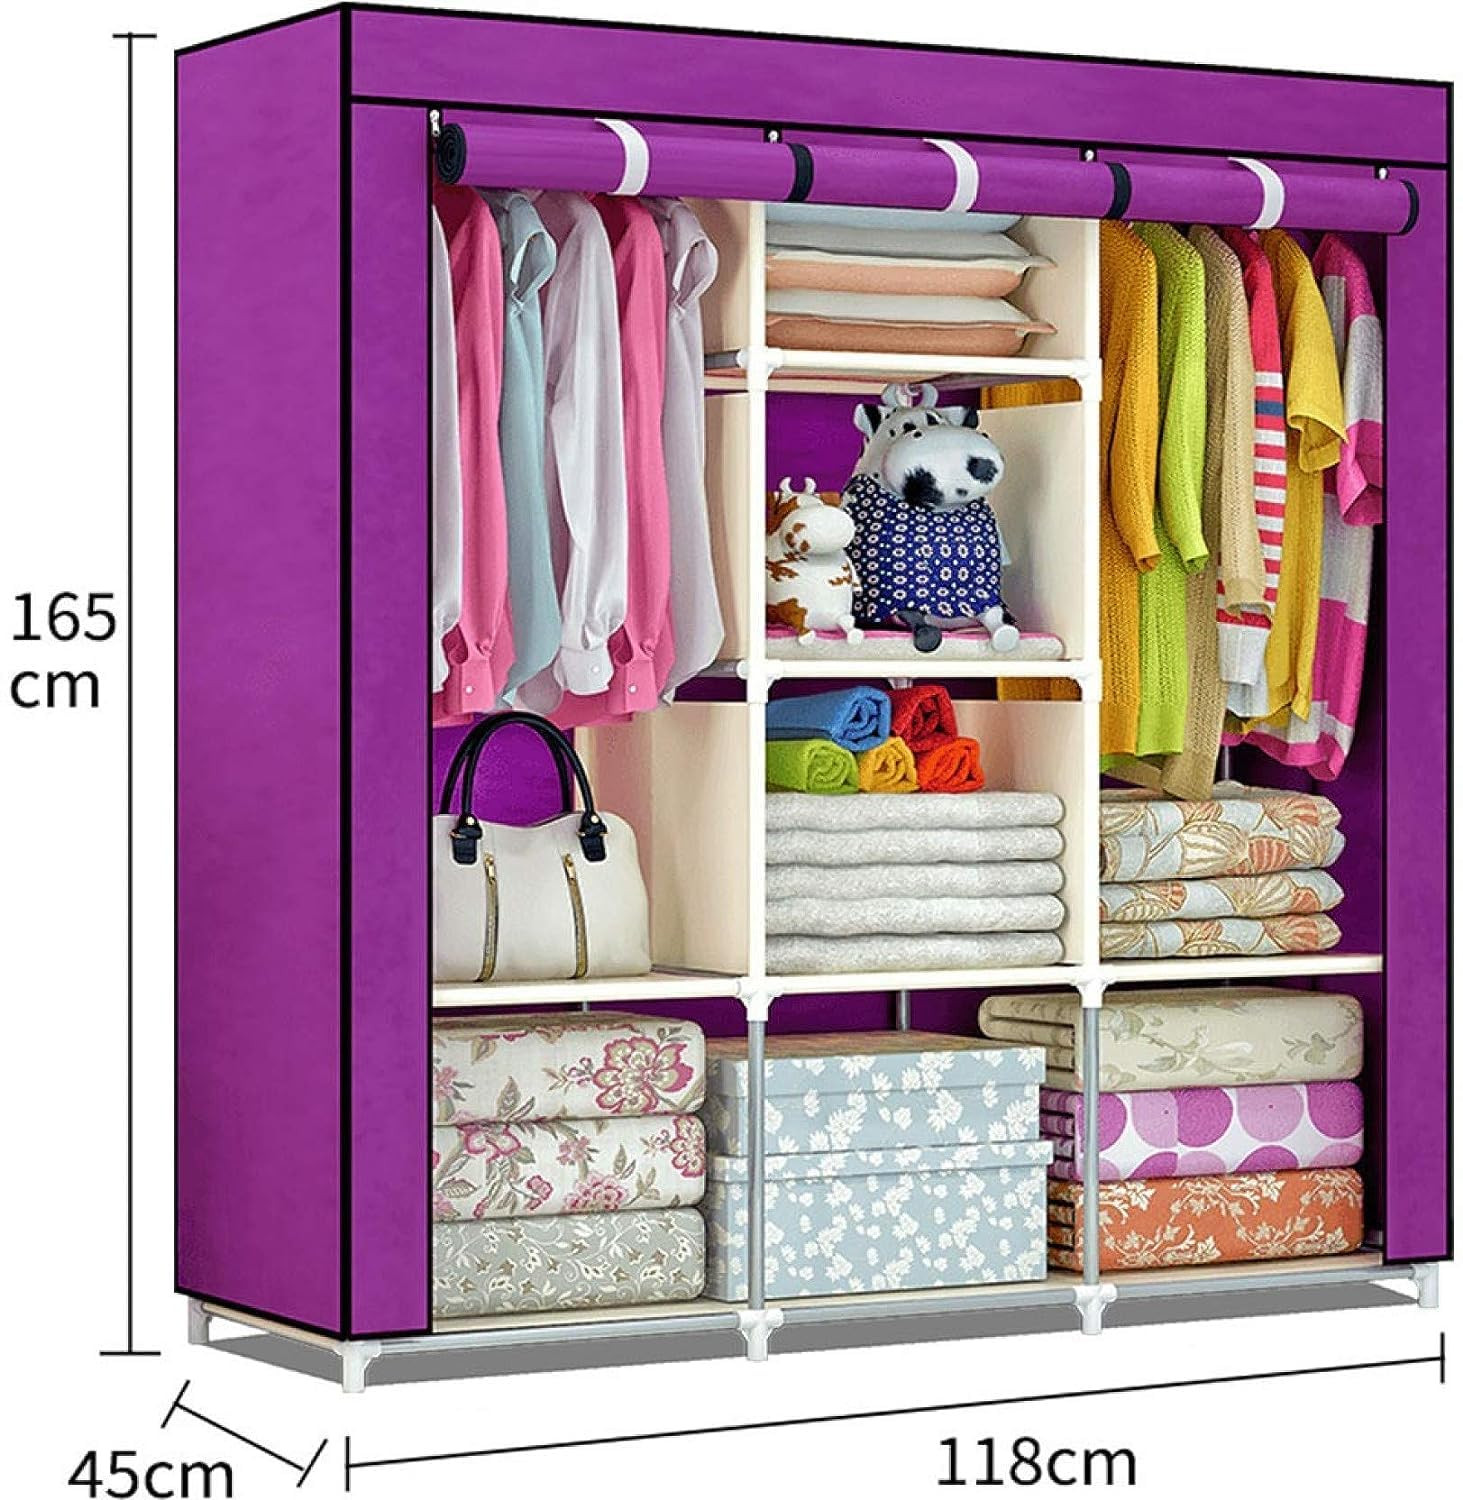 Kuber Industries Foldable Wardrobe for Clothes|Non Woven 2 Door Portable Clothes Rack|6 Shelves Almirah for Clothes (Purple)